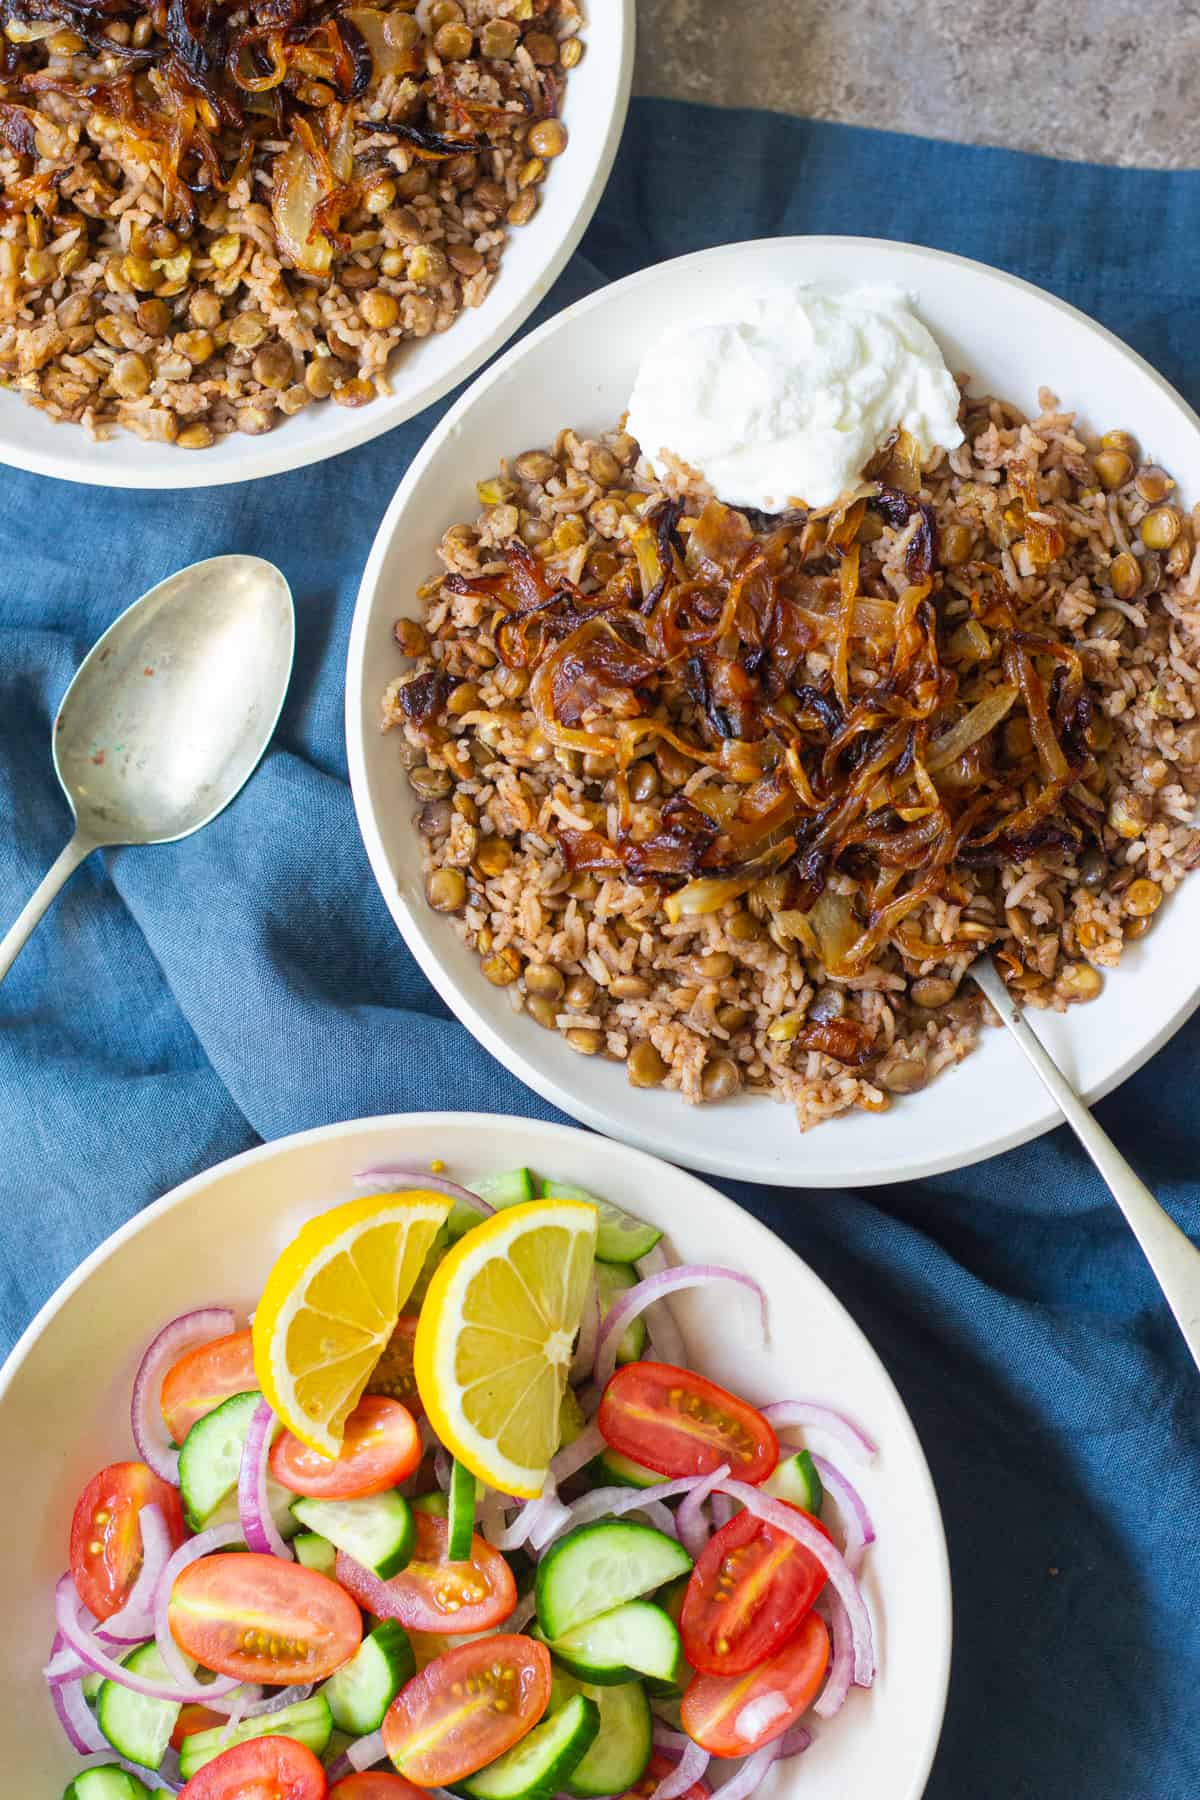 Mujadara is a simple lebanse lentil and rice dish with crispy onions that's packed with flavors. You can serve it with a simple salad. 